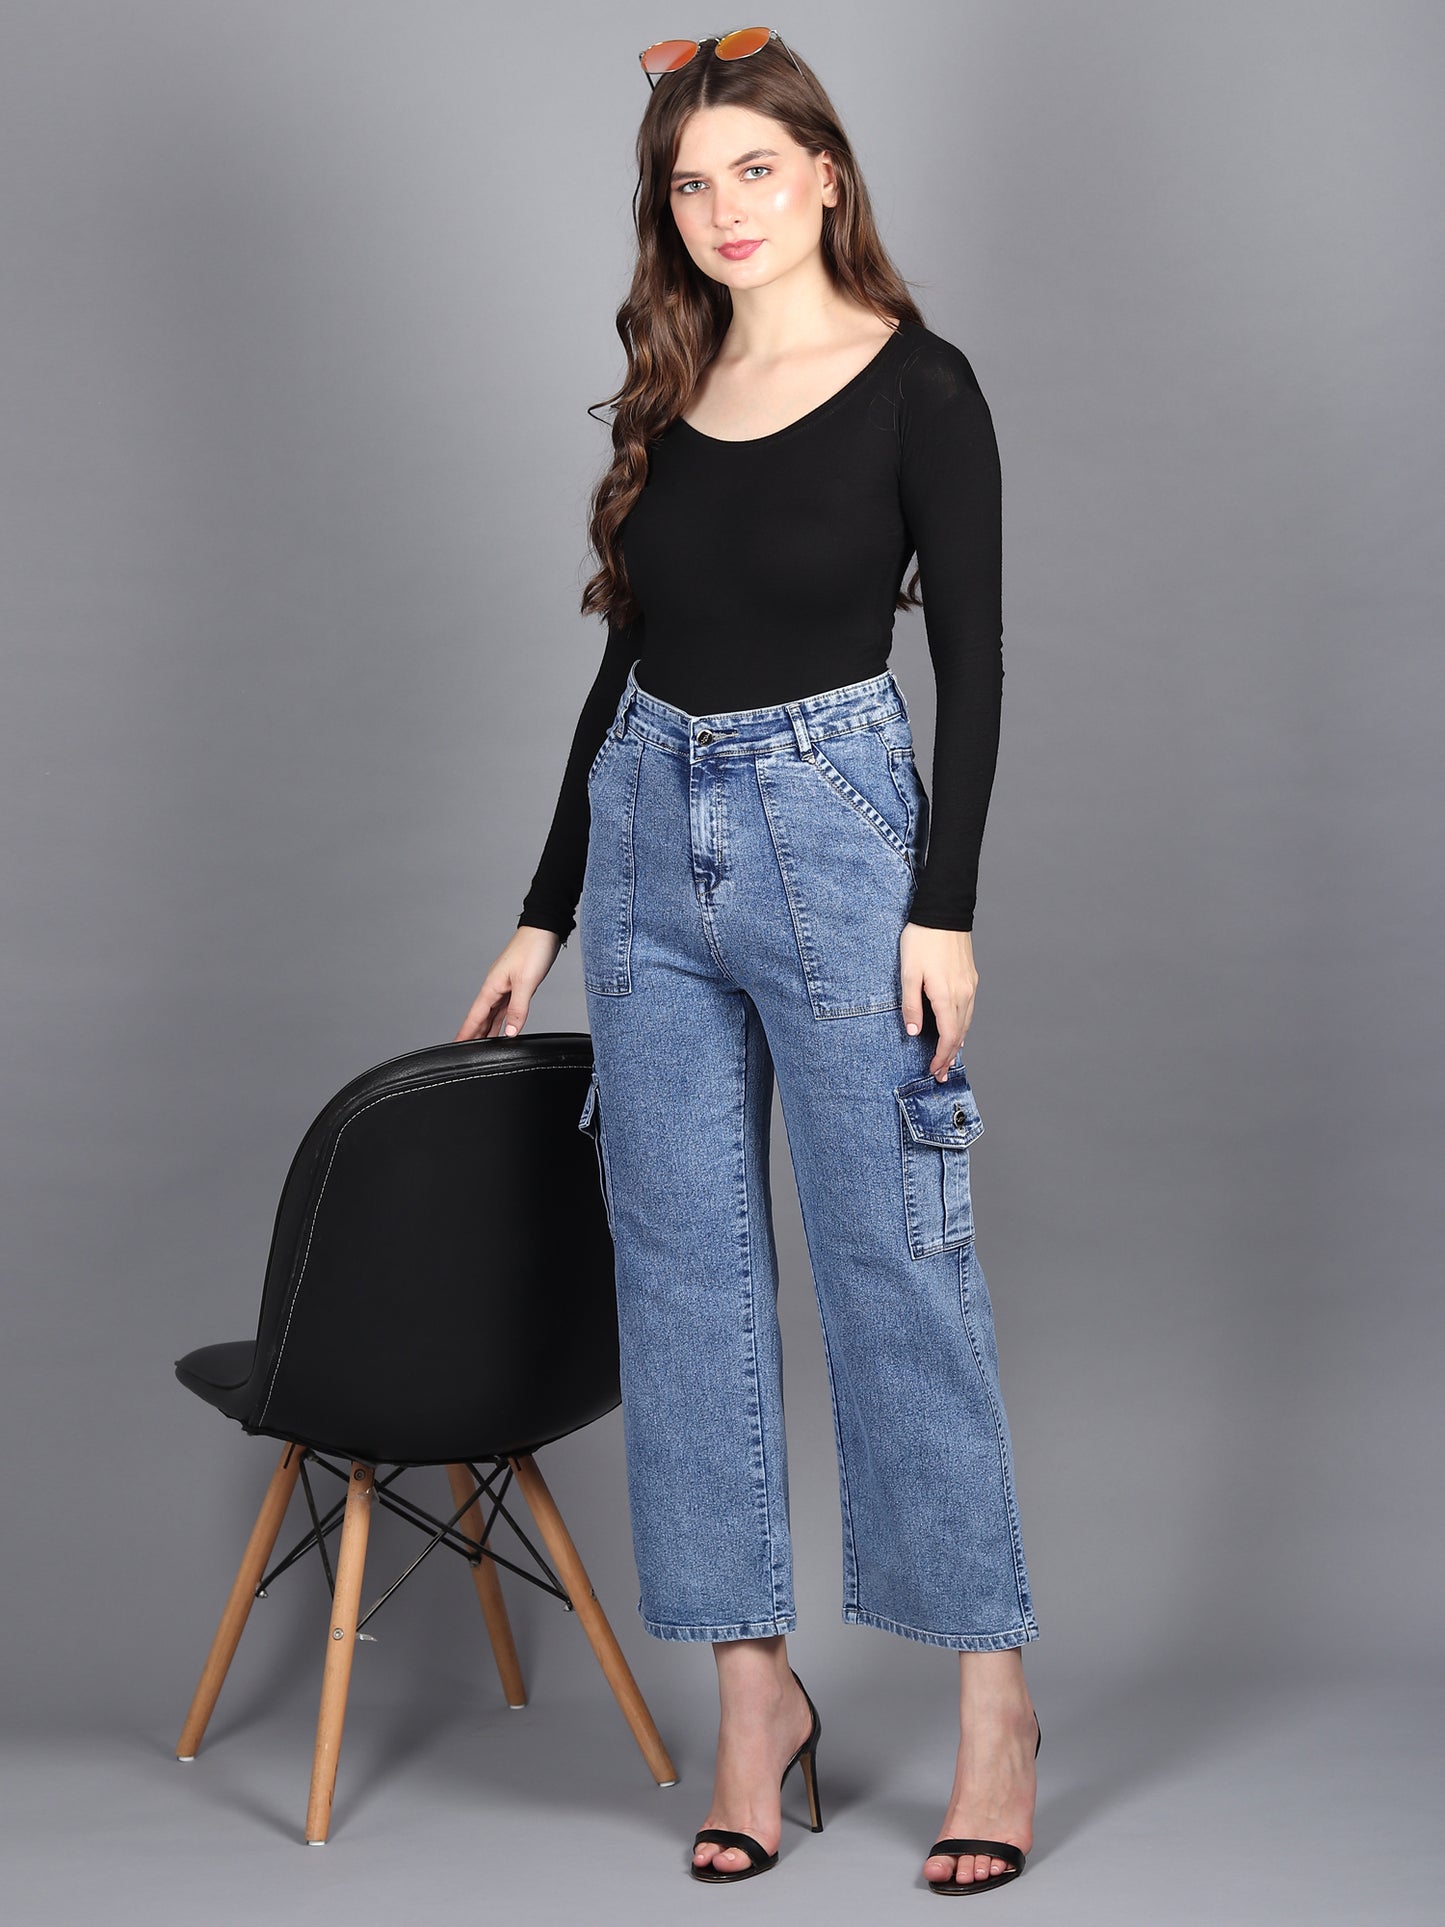 Ice Blue Cargo Jeans For Women High Waist Straight Fit Stretchable Denim - 1215